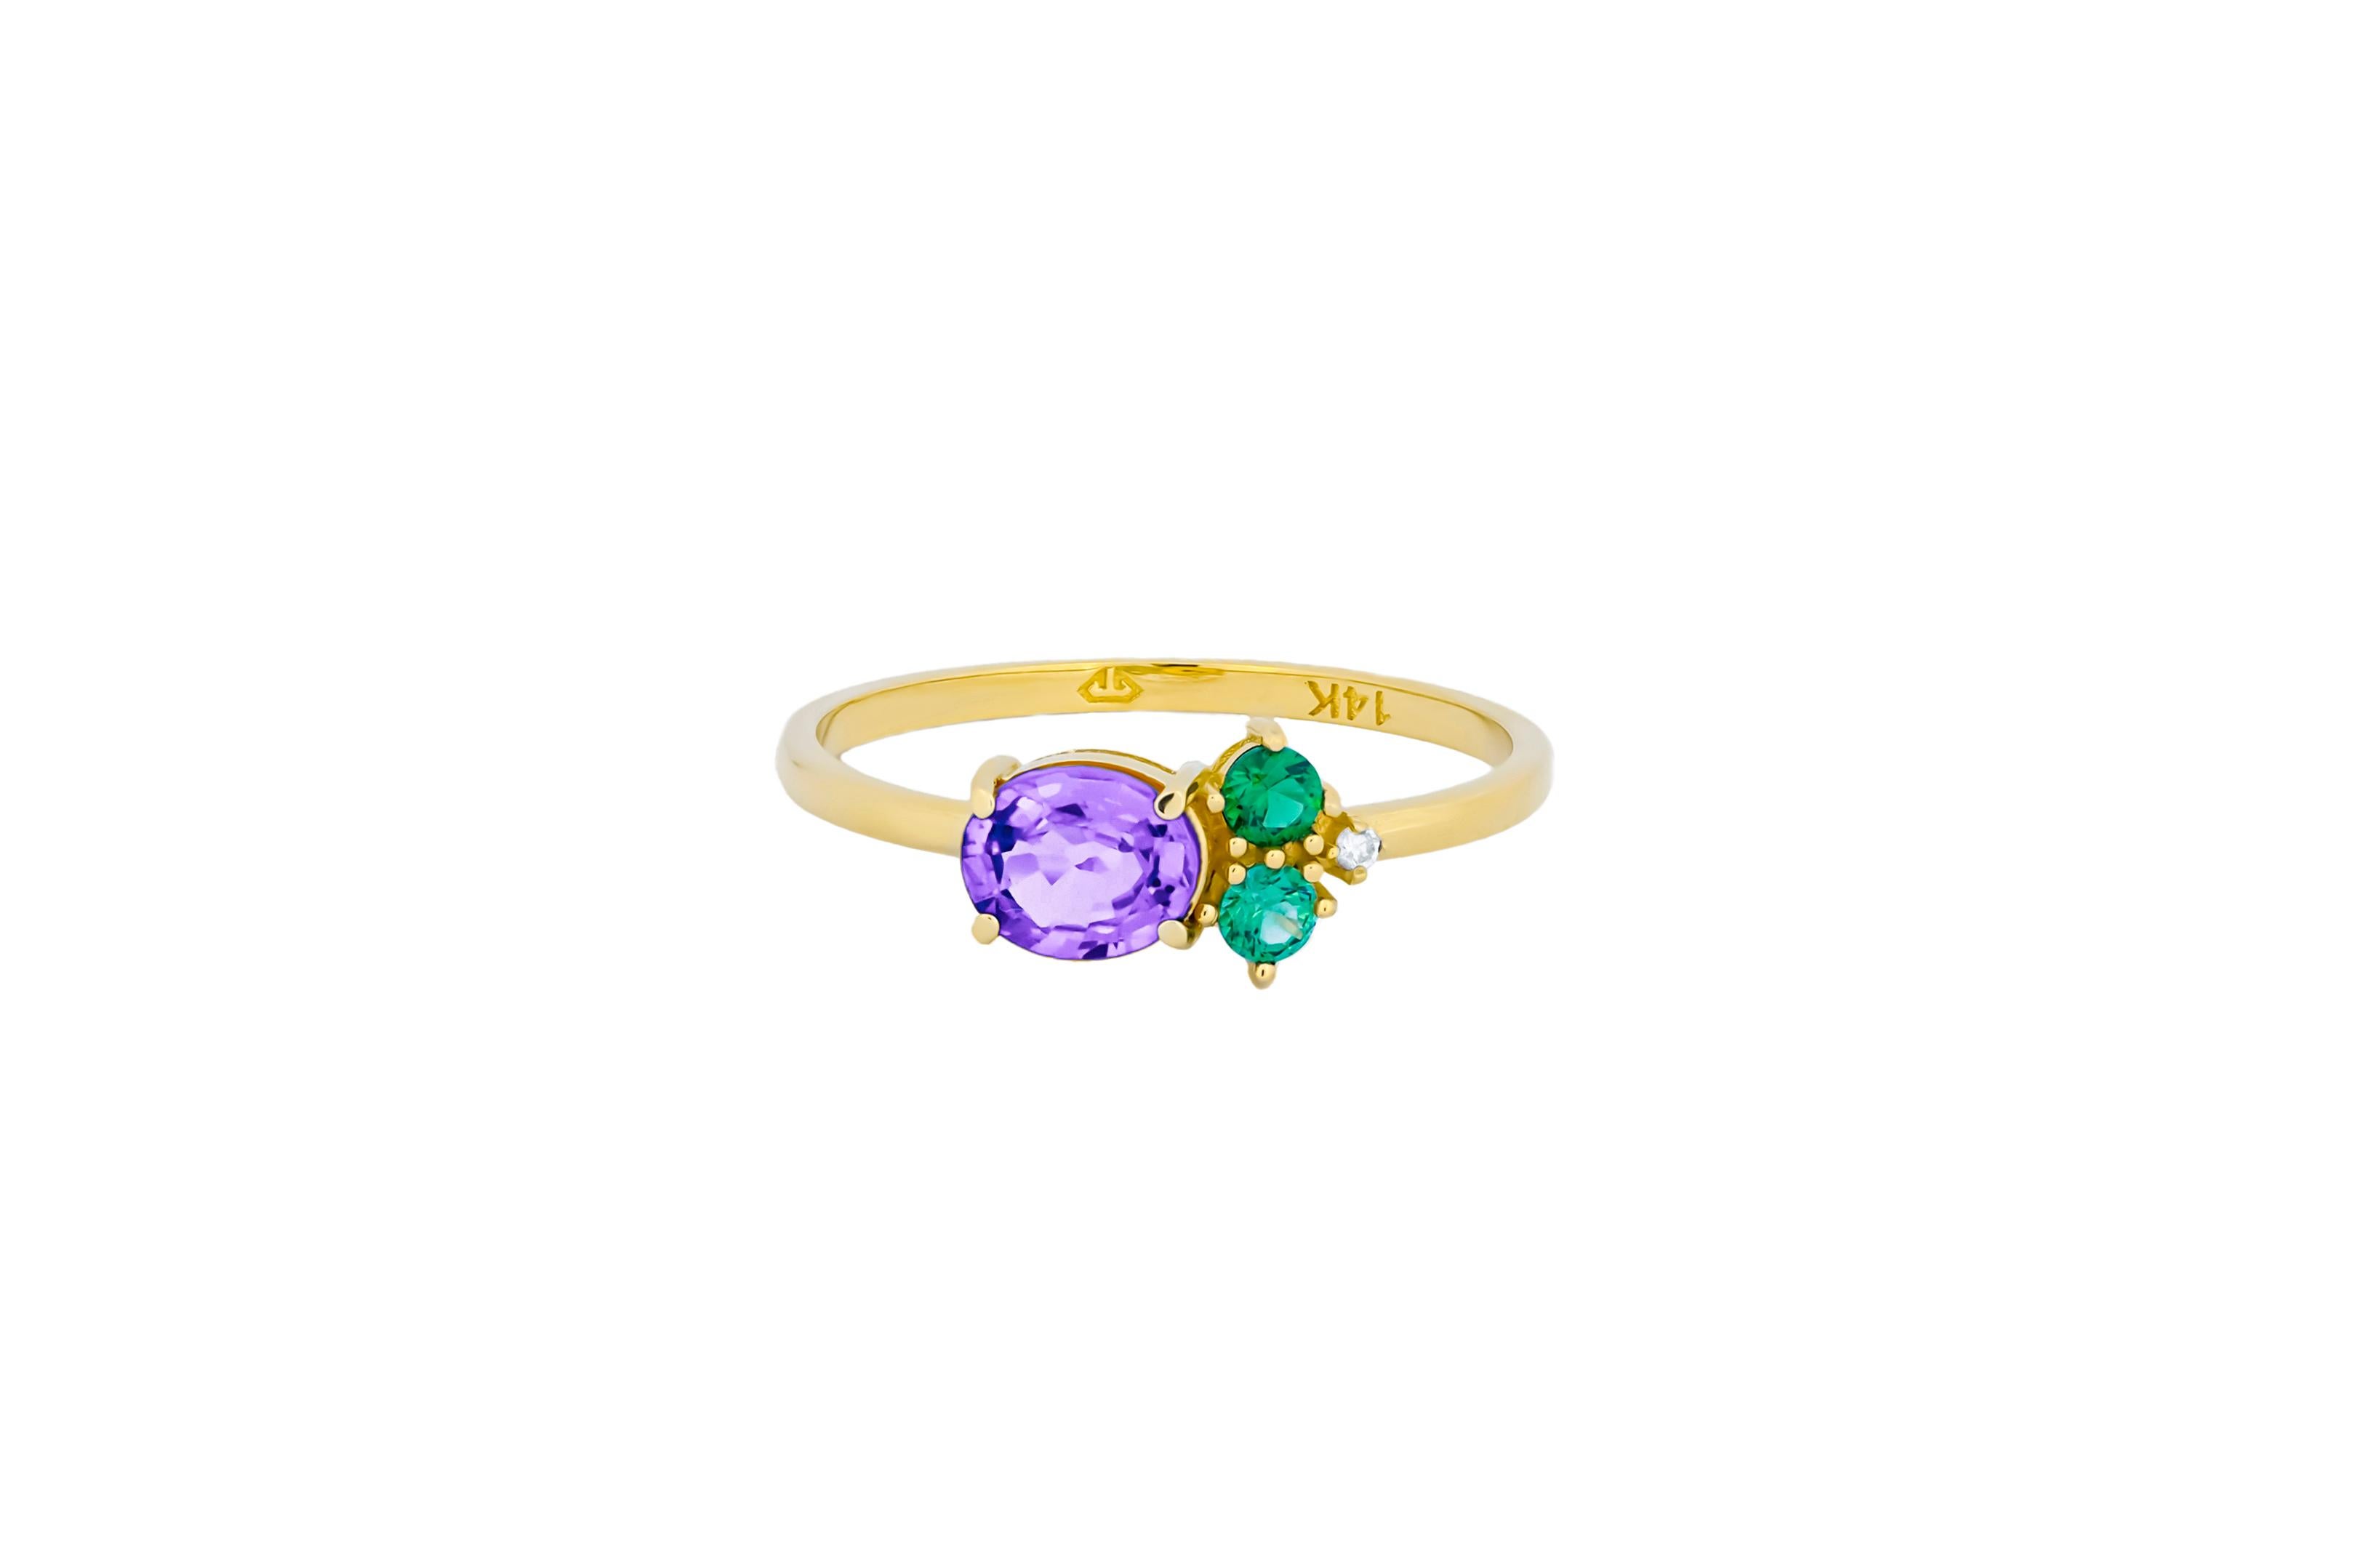 For Sale:  Oval amethyst, tsavorite and diamonds 14k gold ring. 6